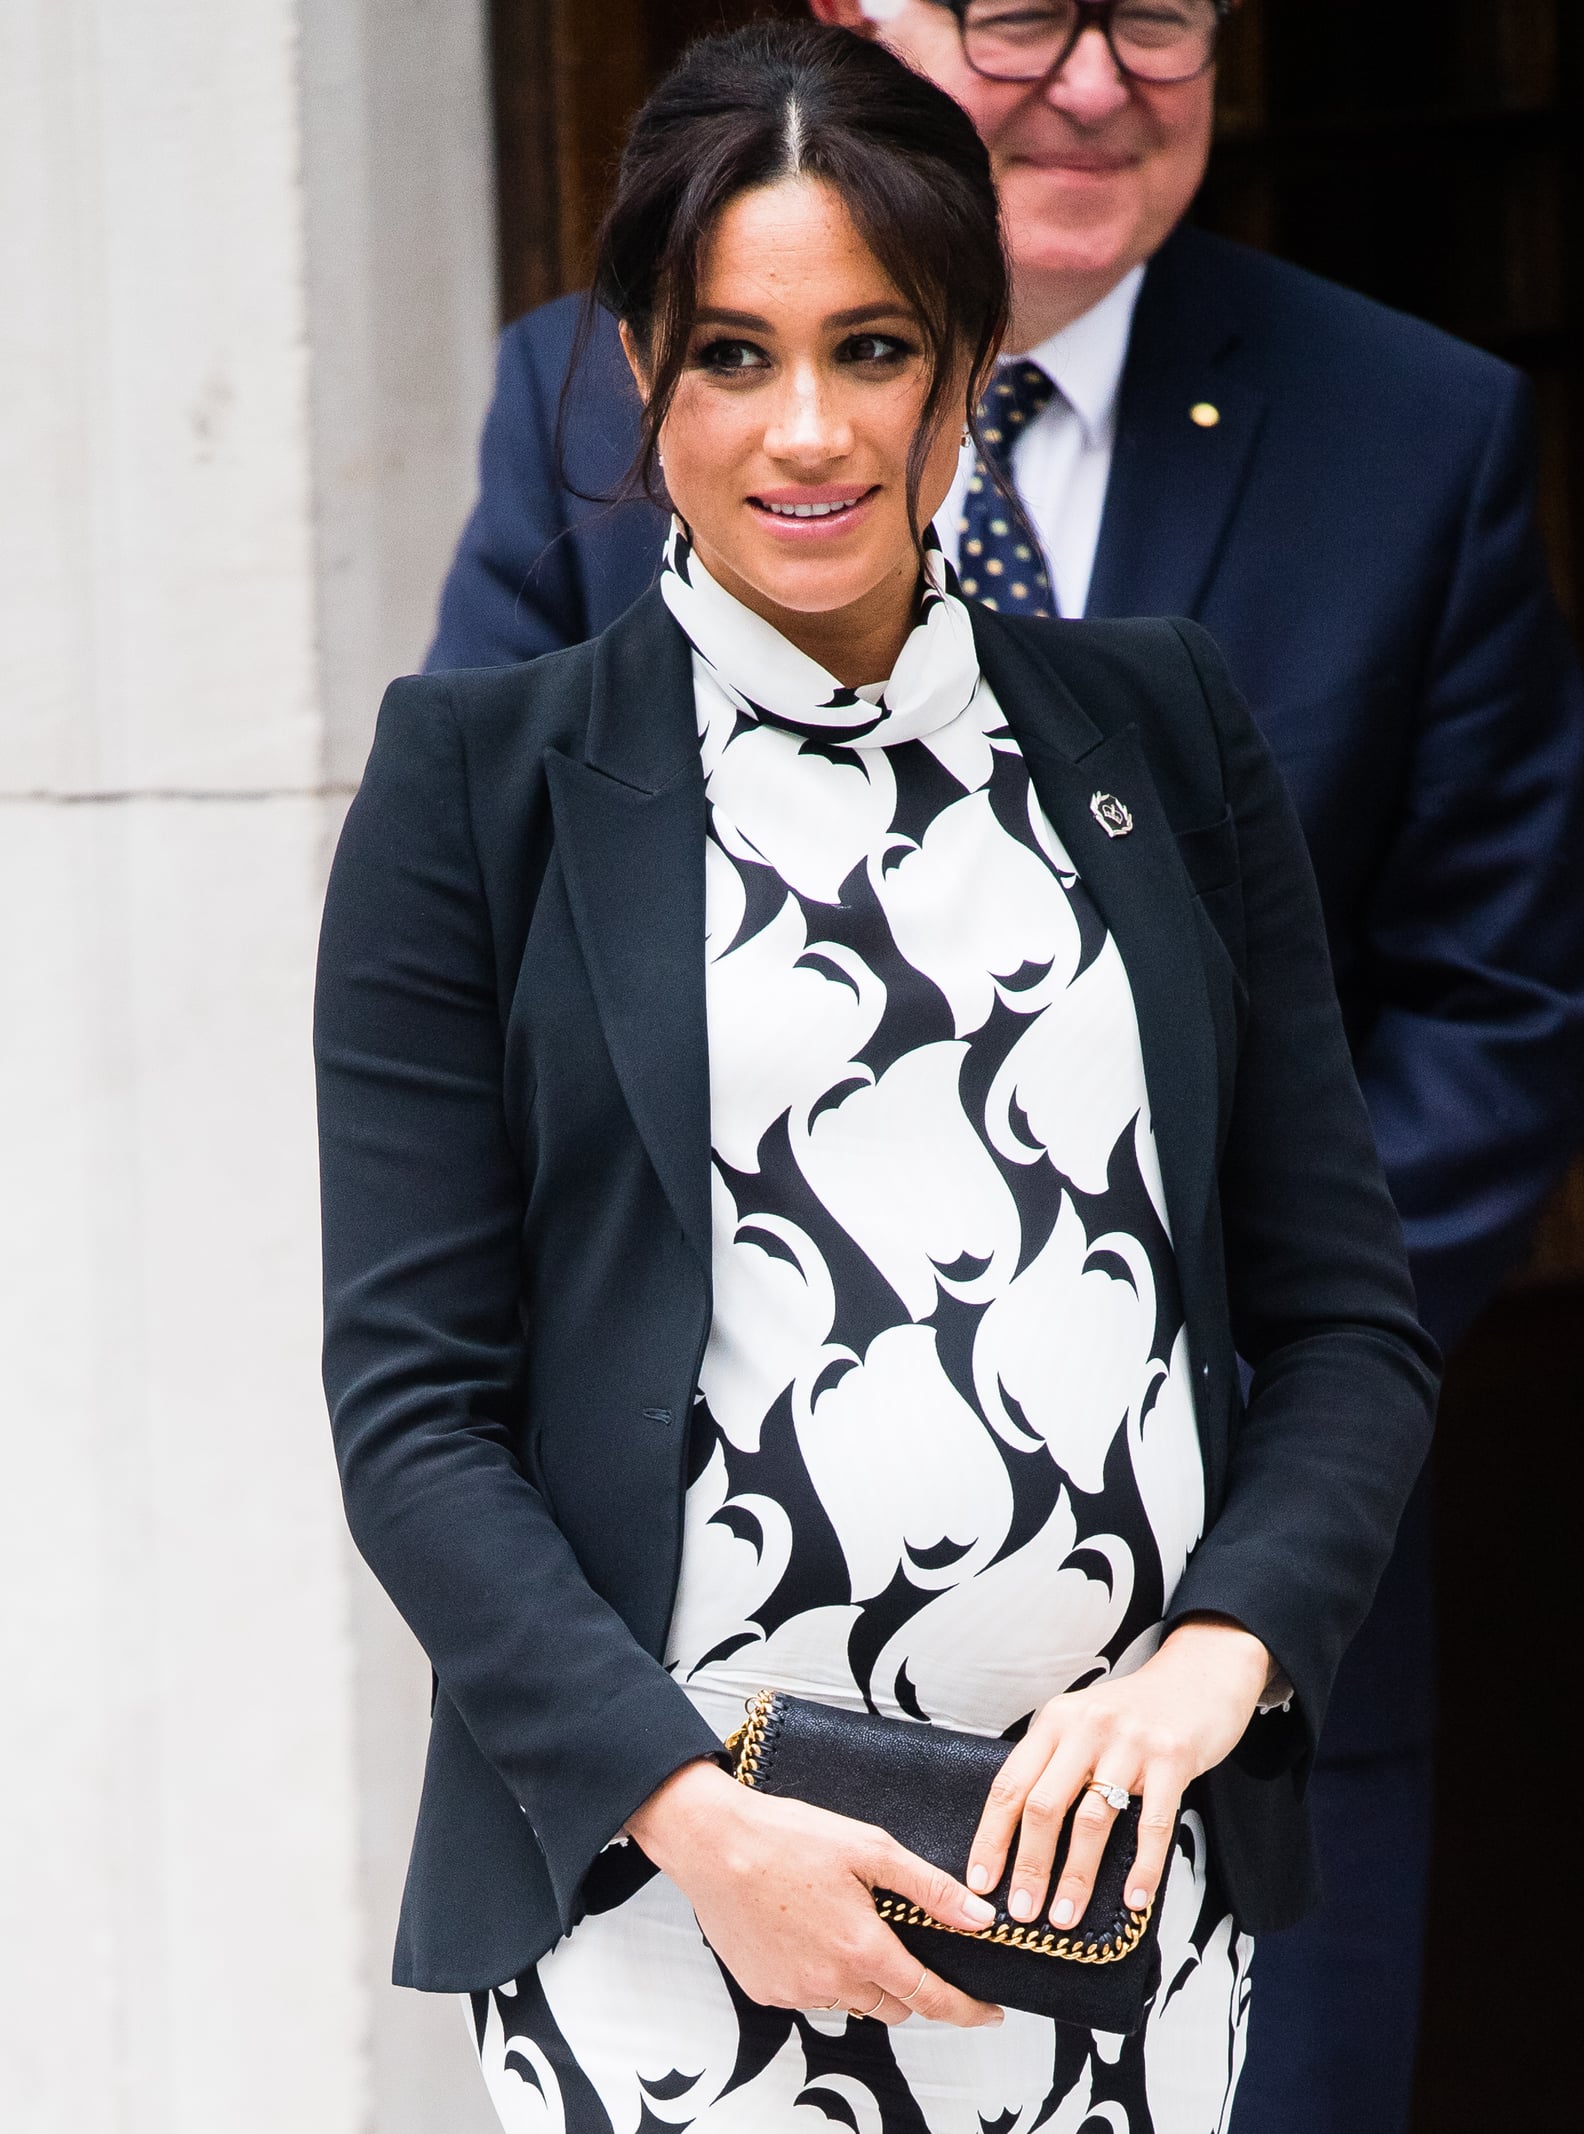 Meghan Markle at IWD Panel Discussion March 2019 | POPSUGAR Celebrity